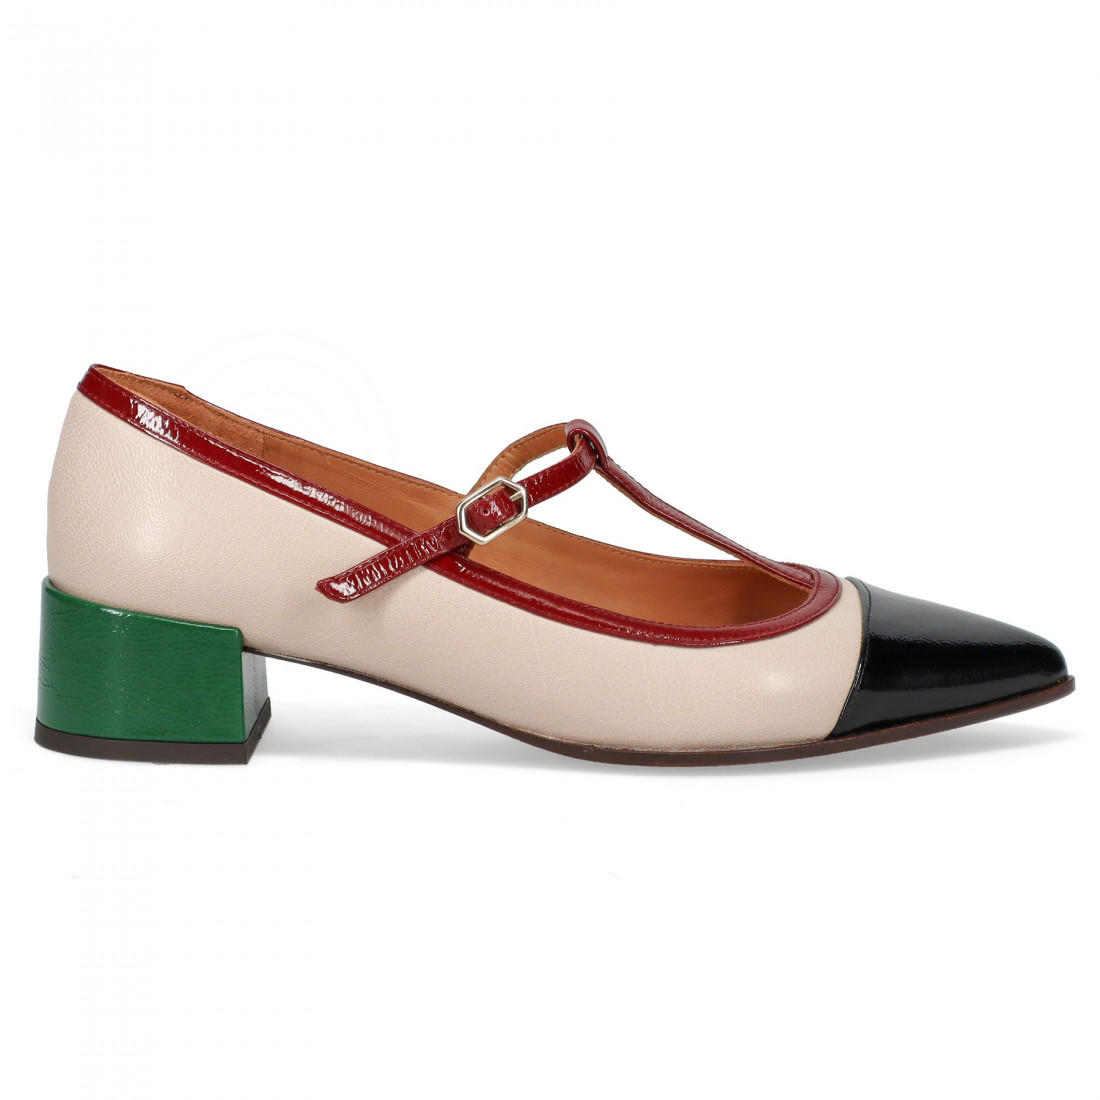 Chie Mihara women's shoes | St. George